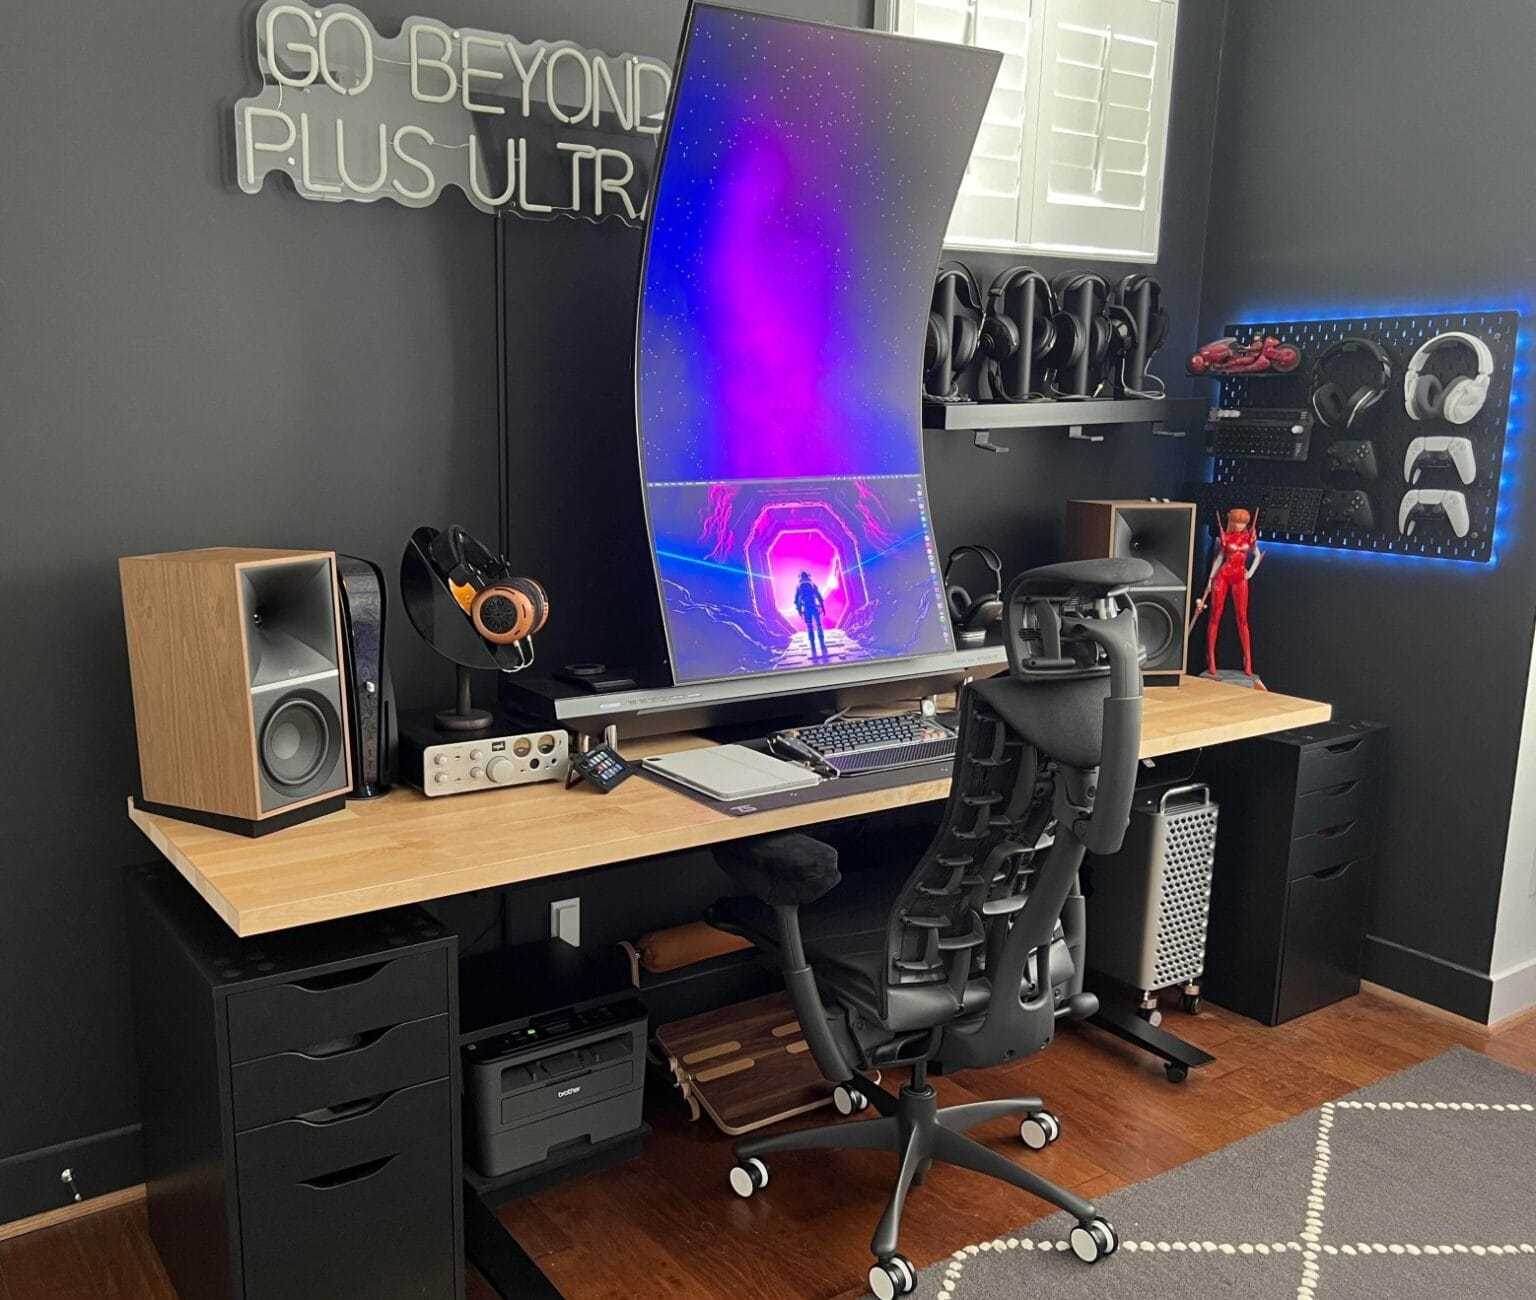 Mac Pro setup with 55-inch curved Samsung display in portrait mode